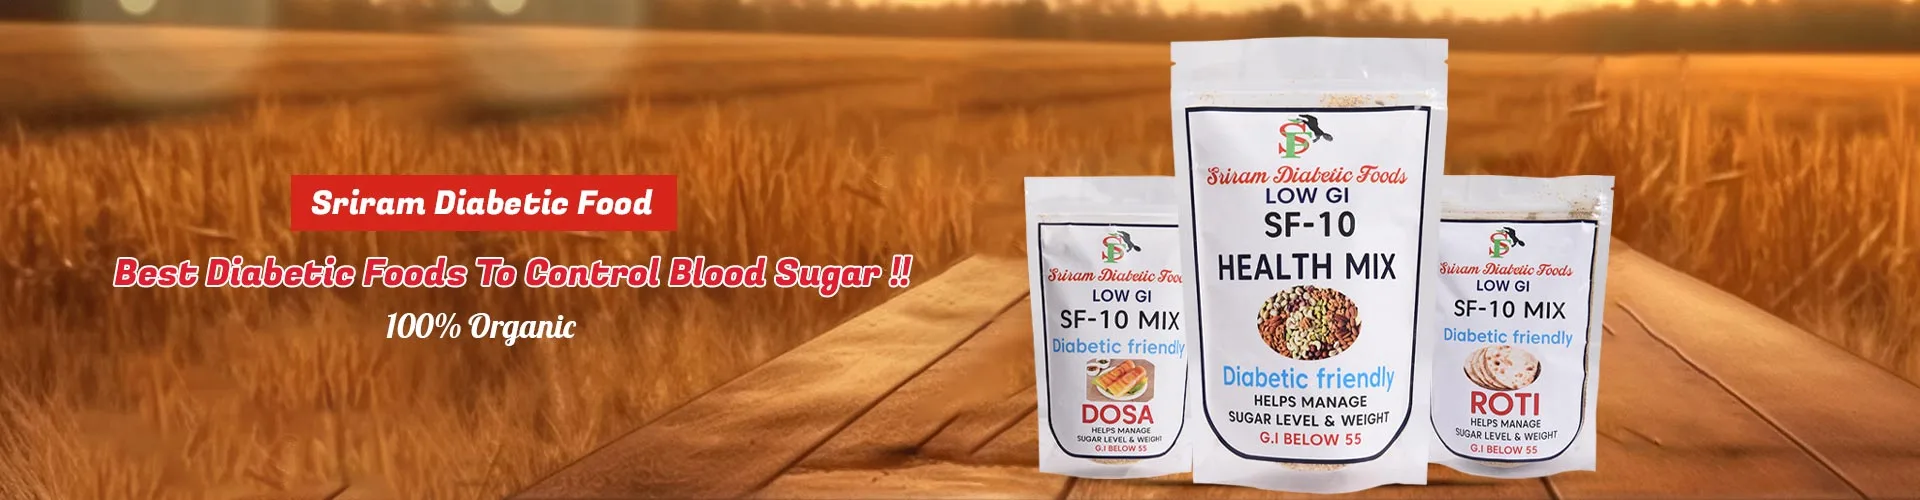 Dosa Mix Manufacturers in Neemuch